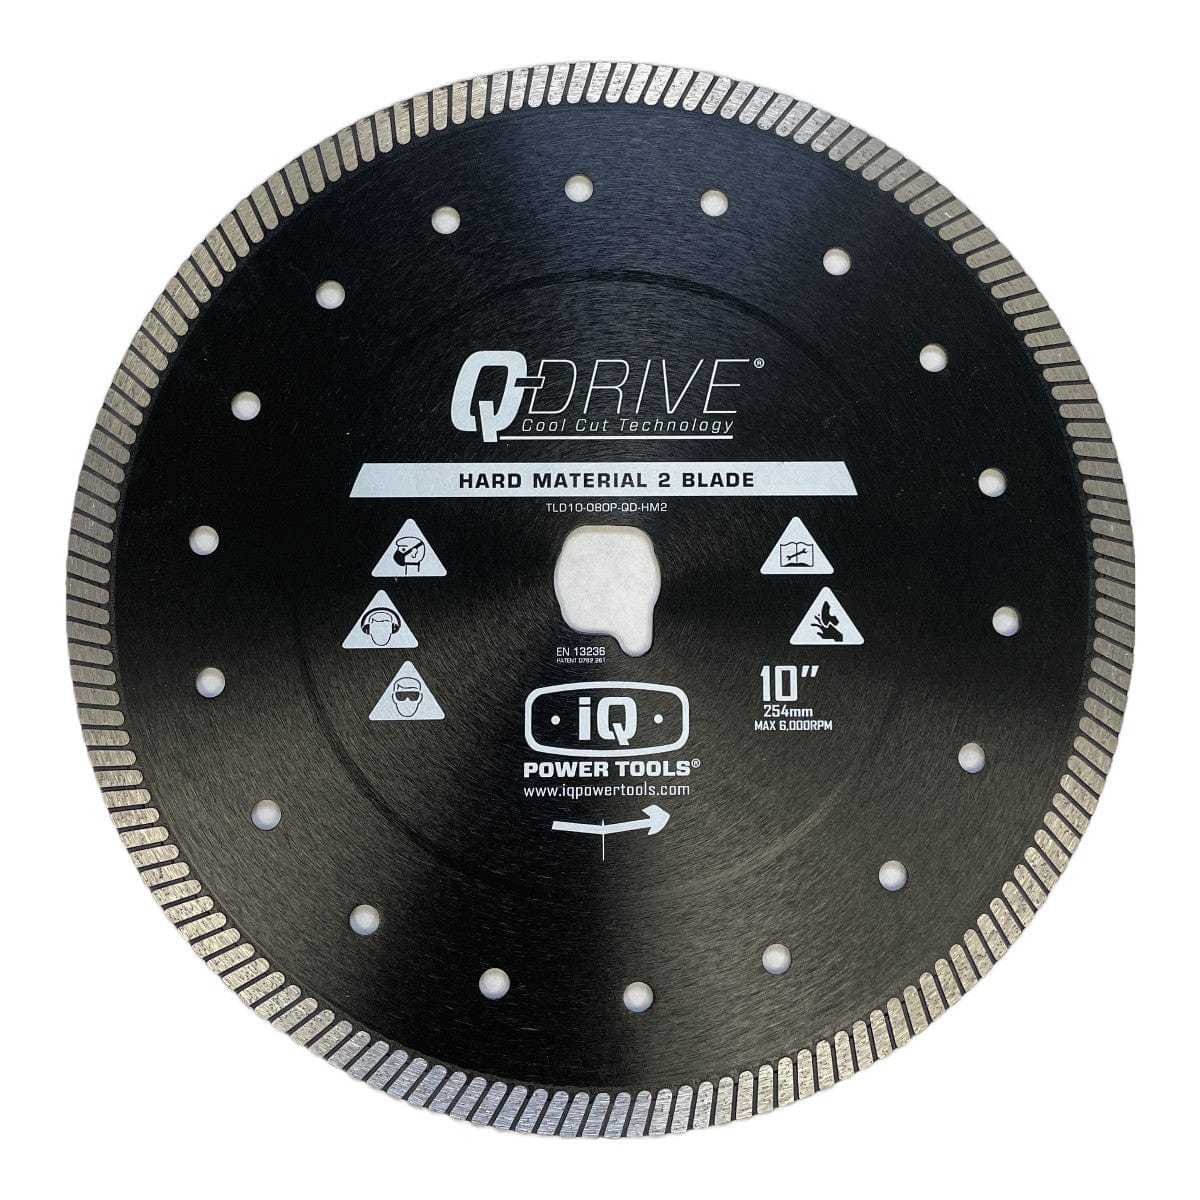 Q-Drive Turbo Cutter Blade Dry 10" x.080 - Hard Material/Porcelain Blade